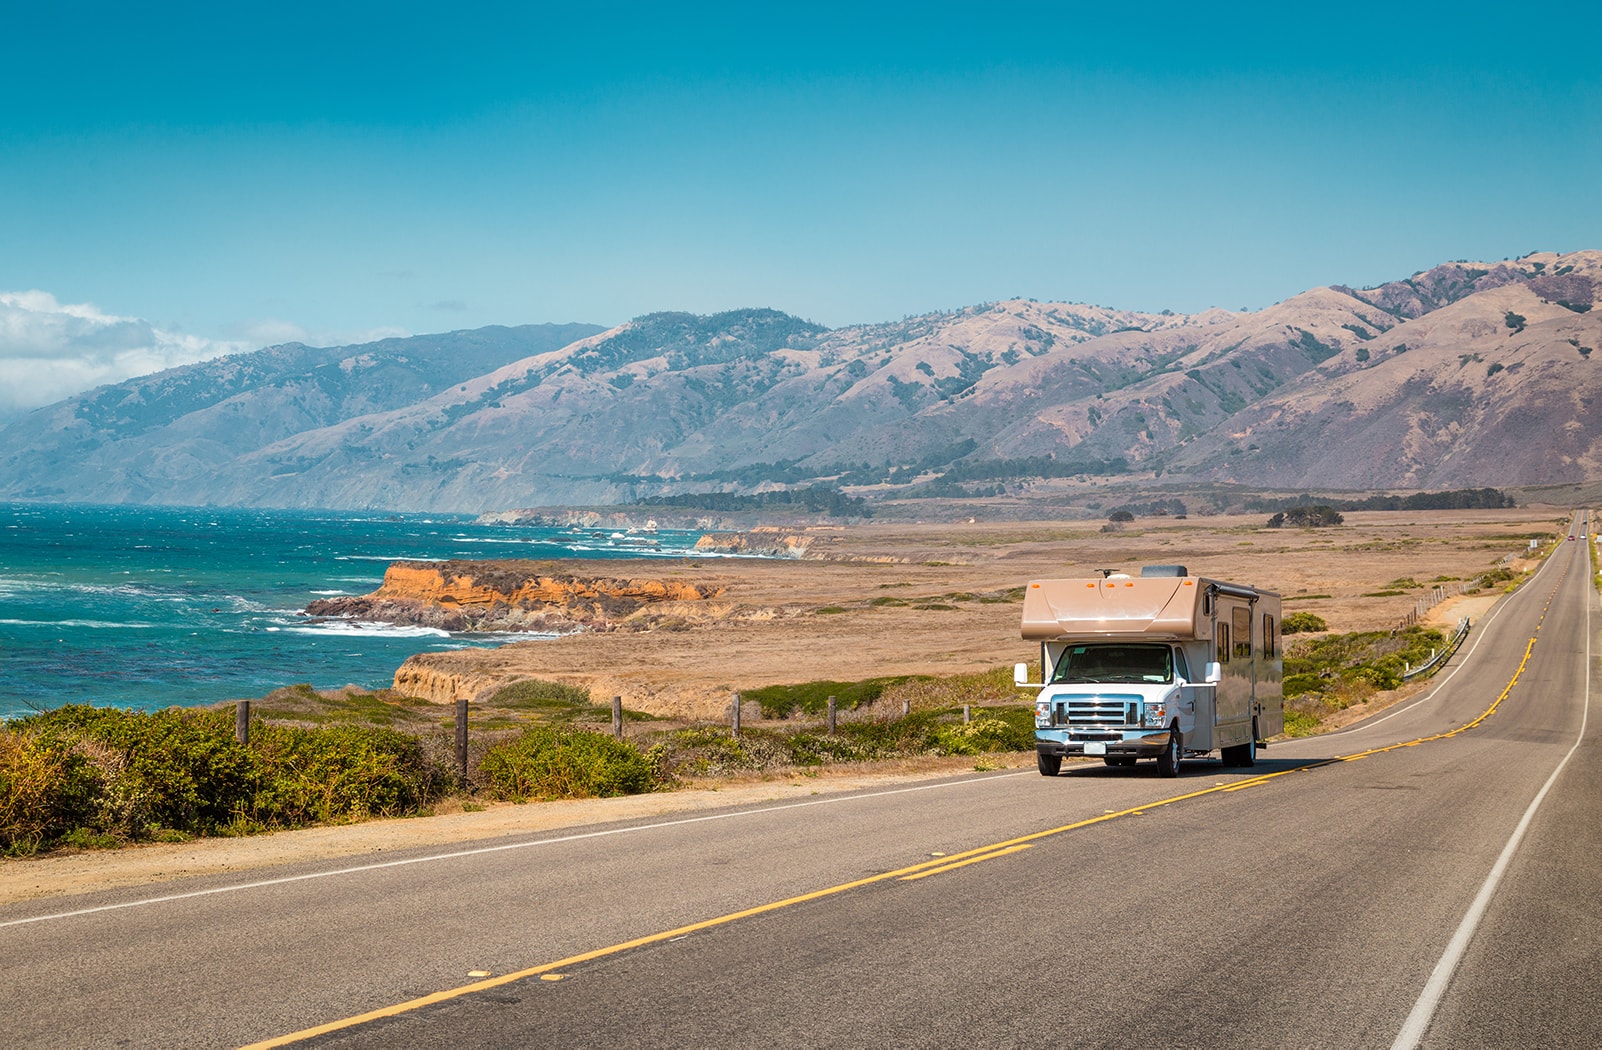 A large RV drives along the California Highway 1